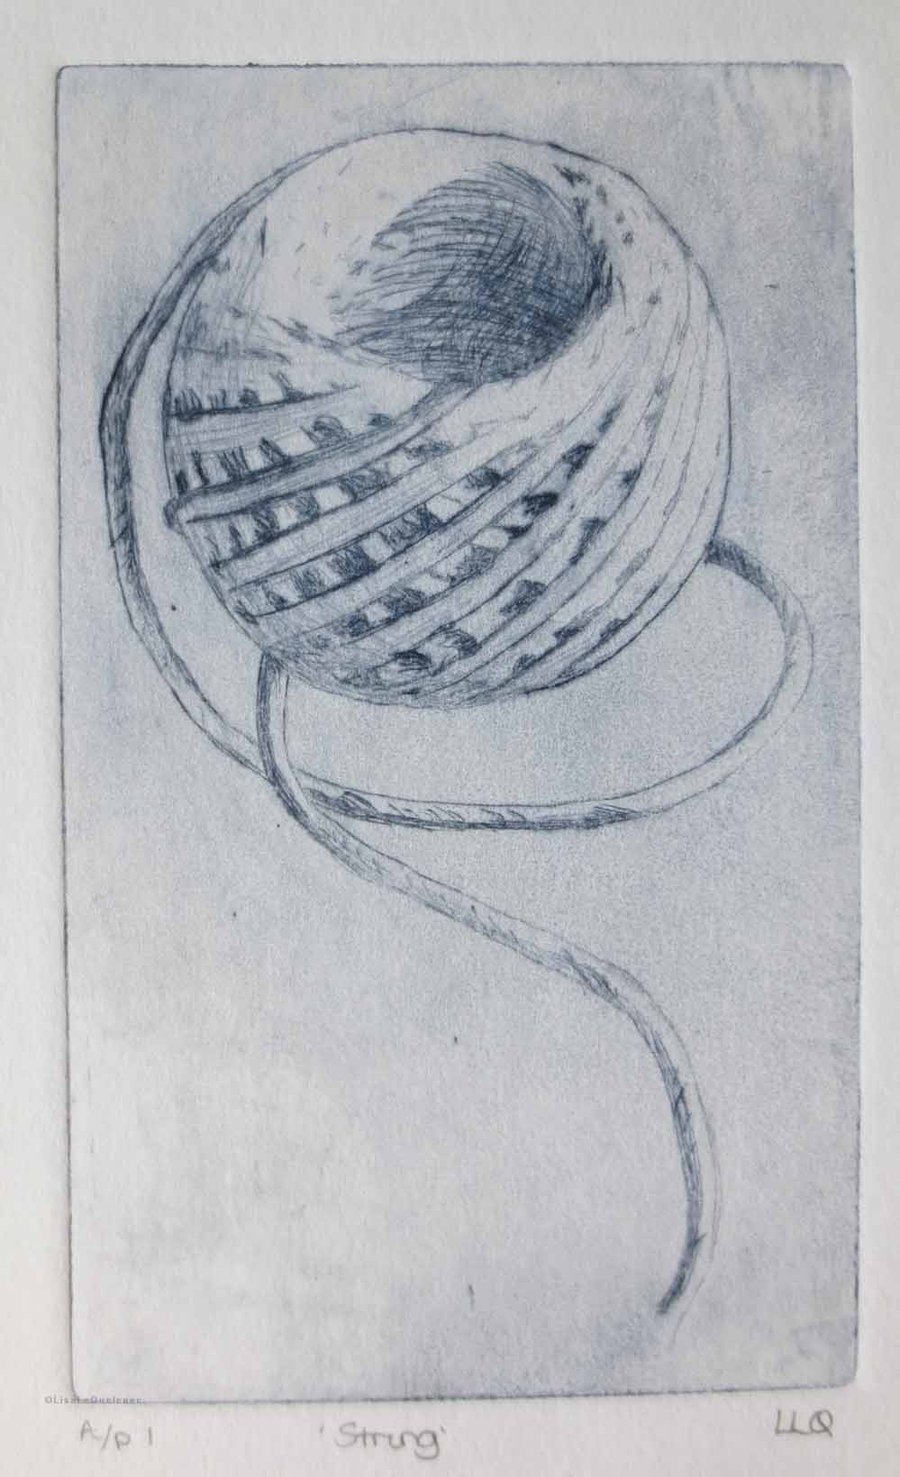 Original drypoint of a ball of string